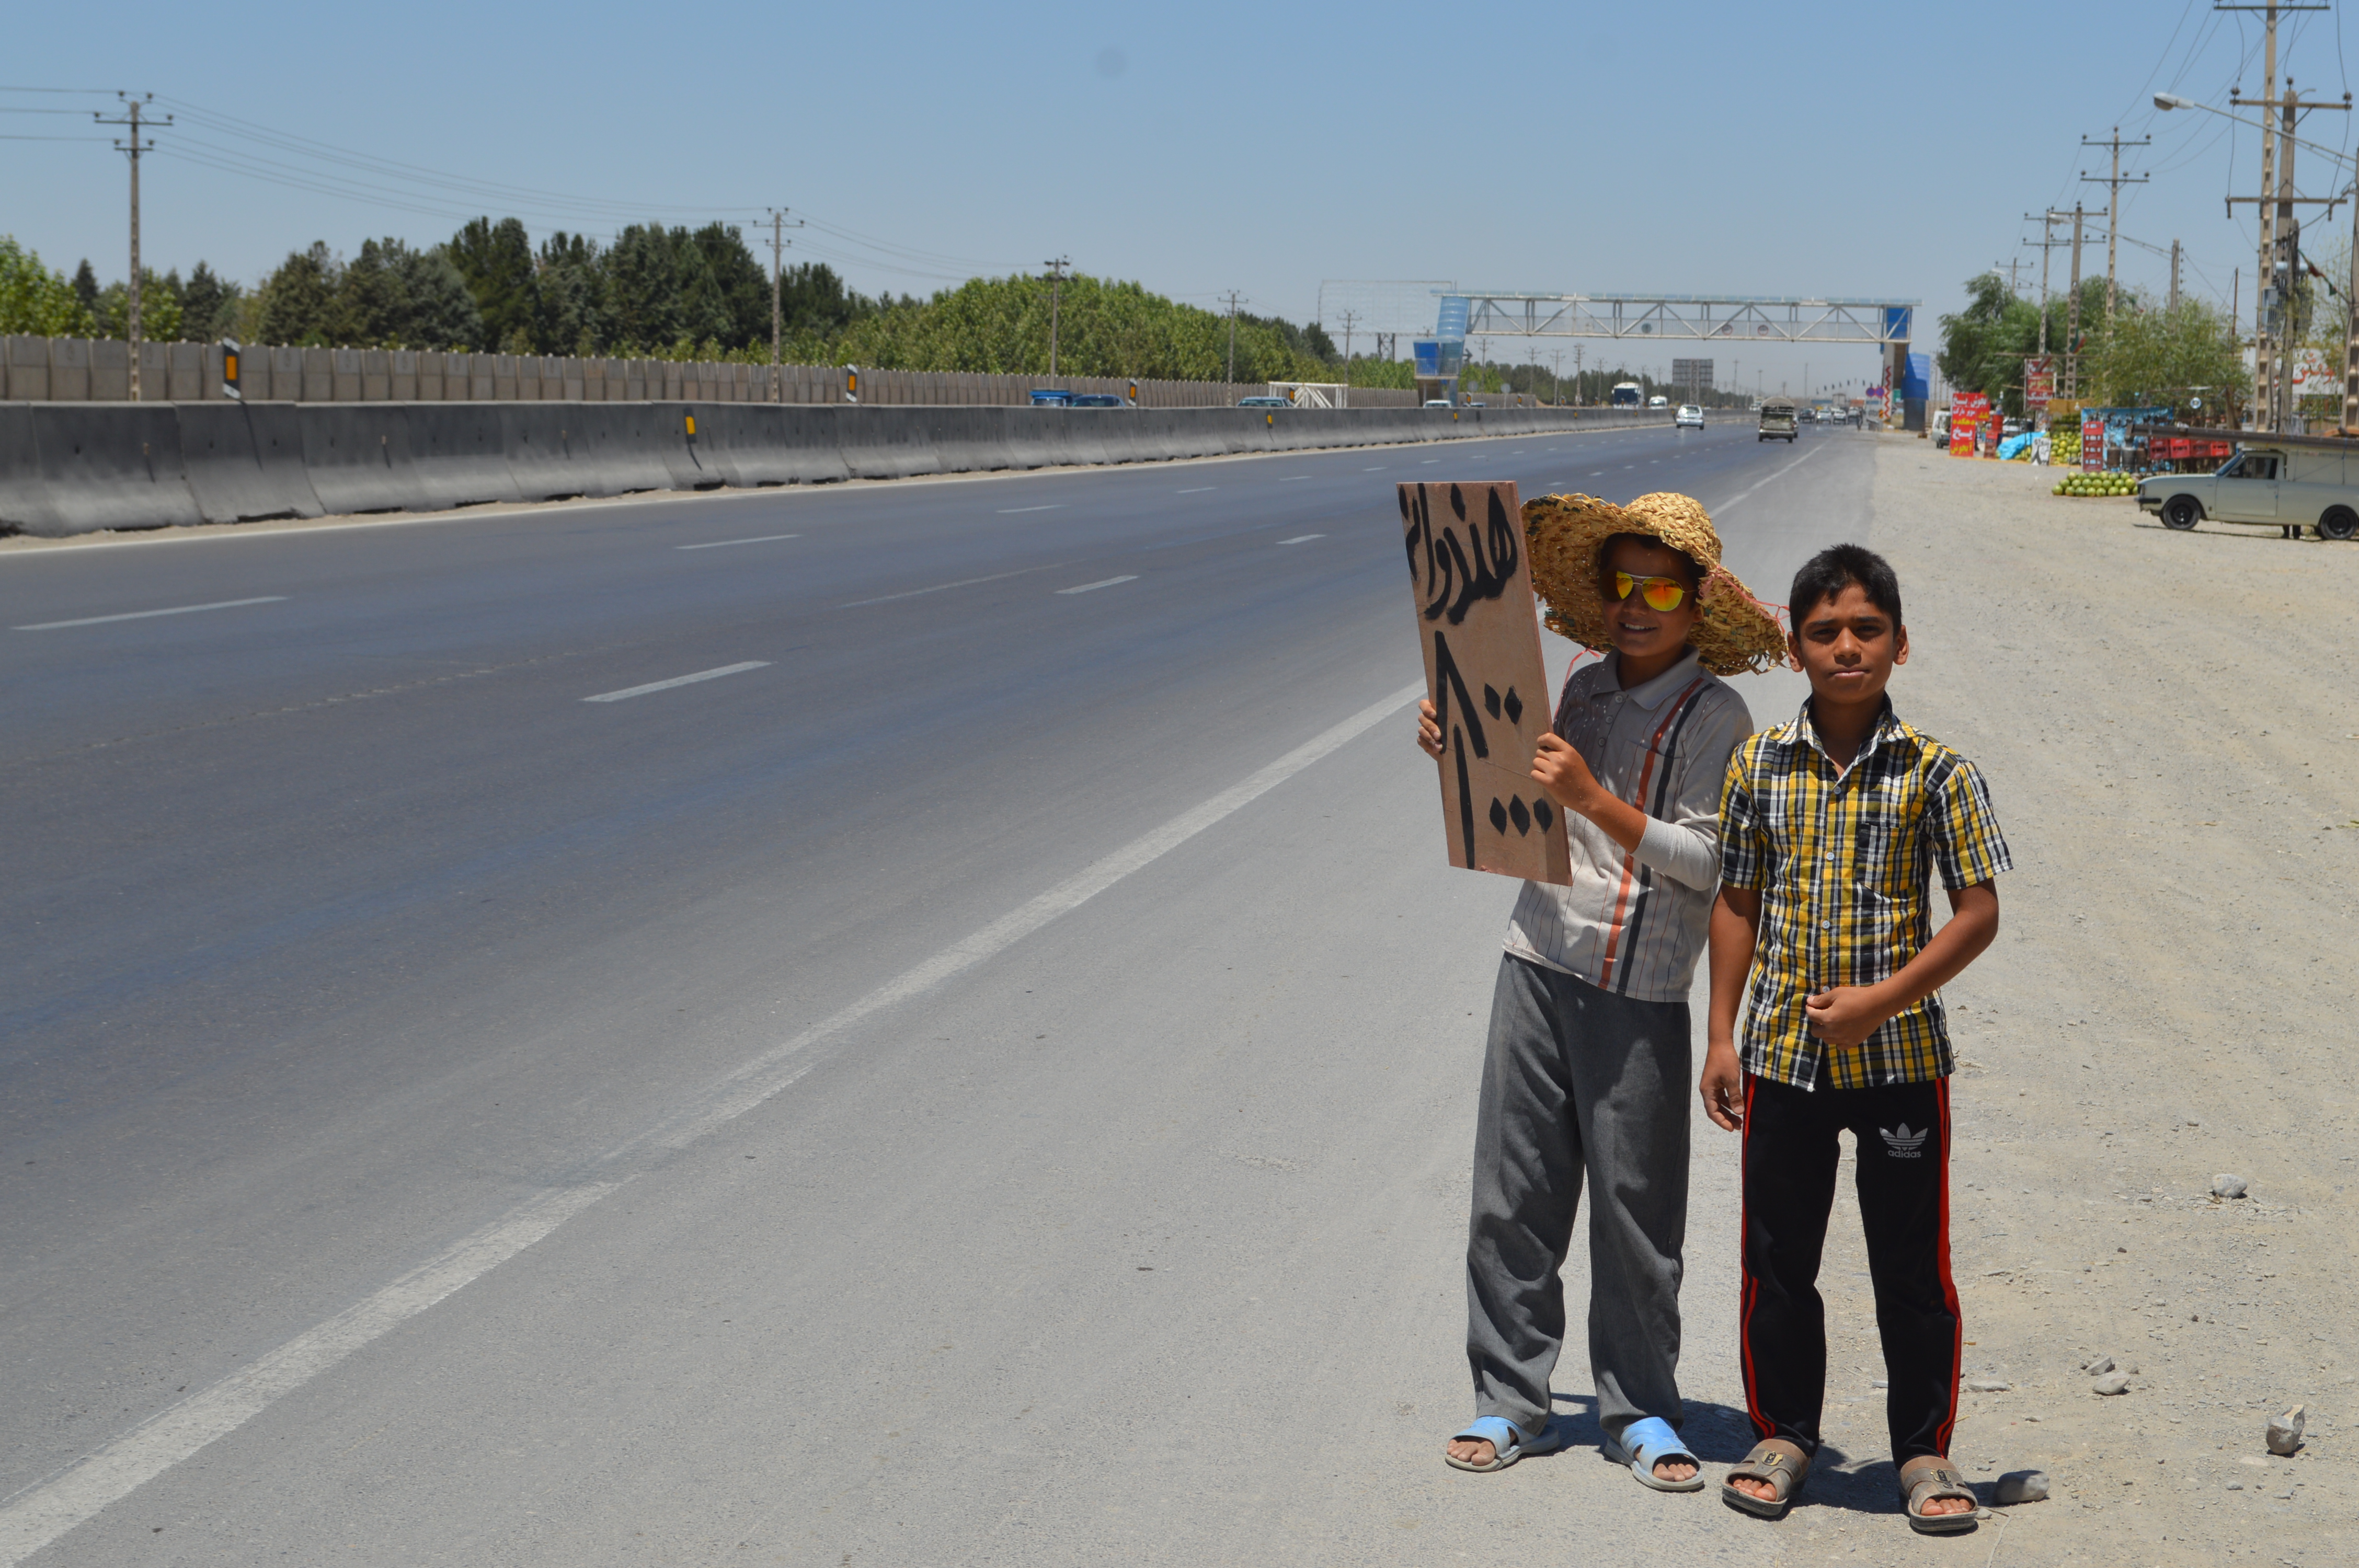 Persian boys beside the road